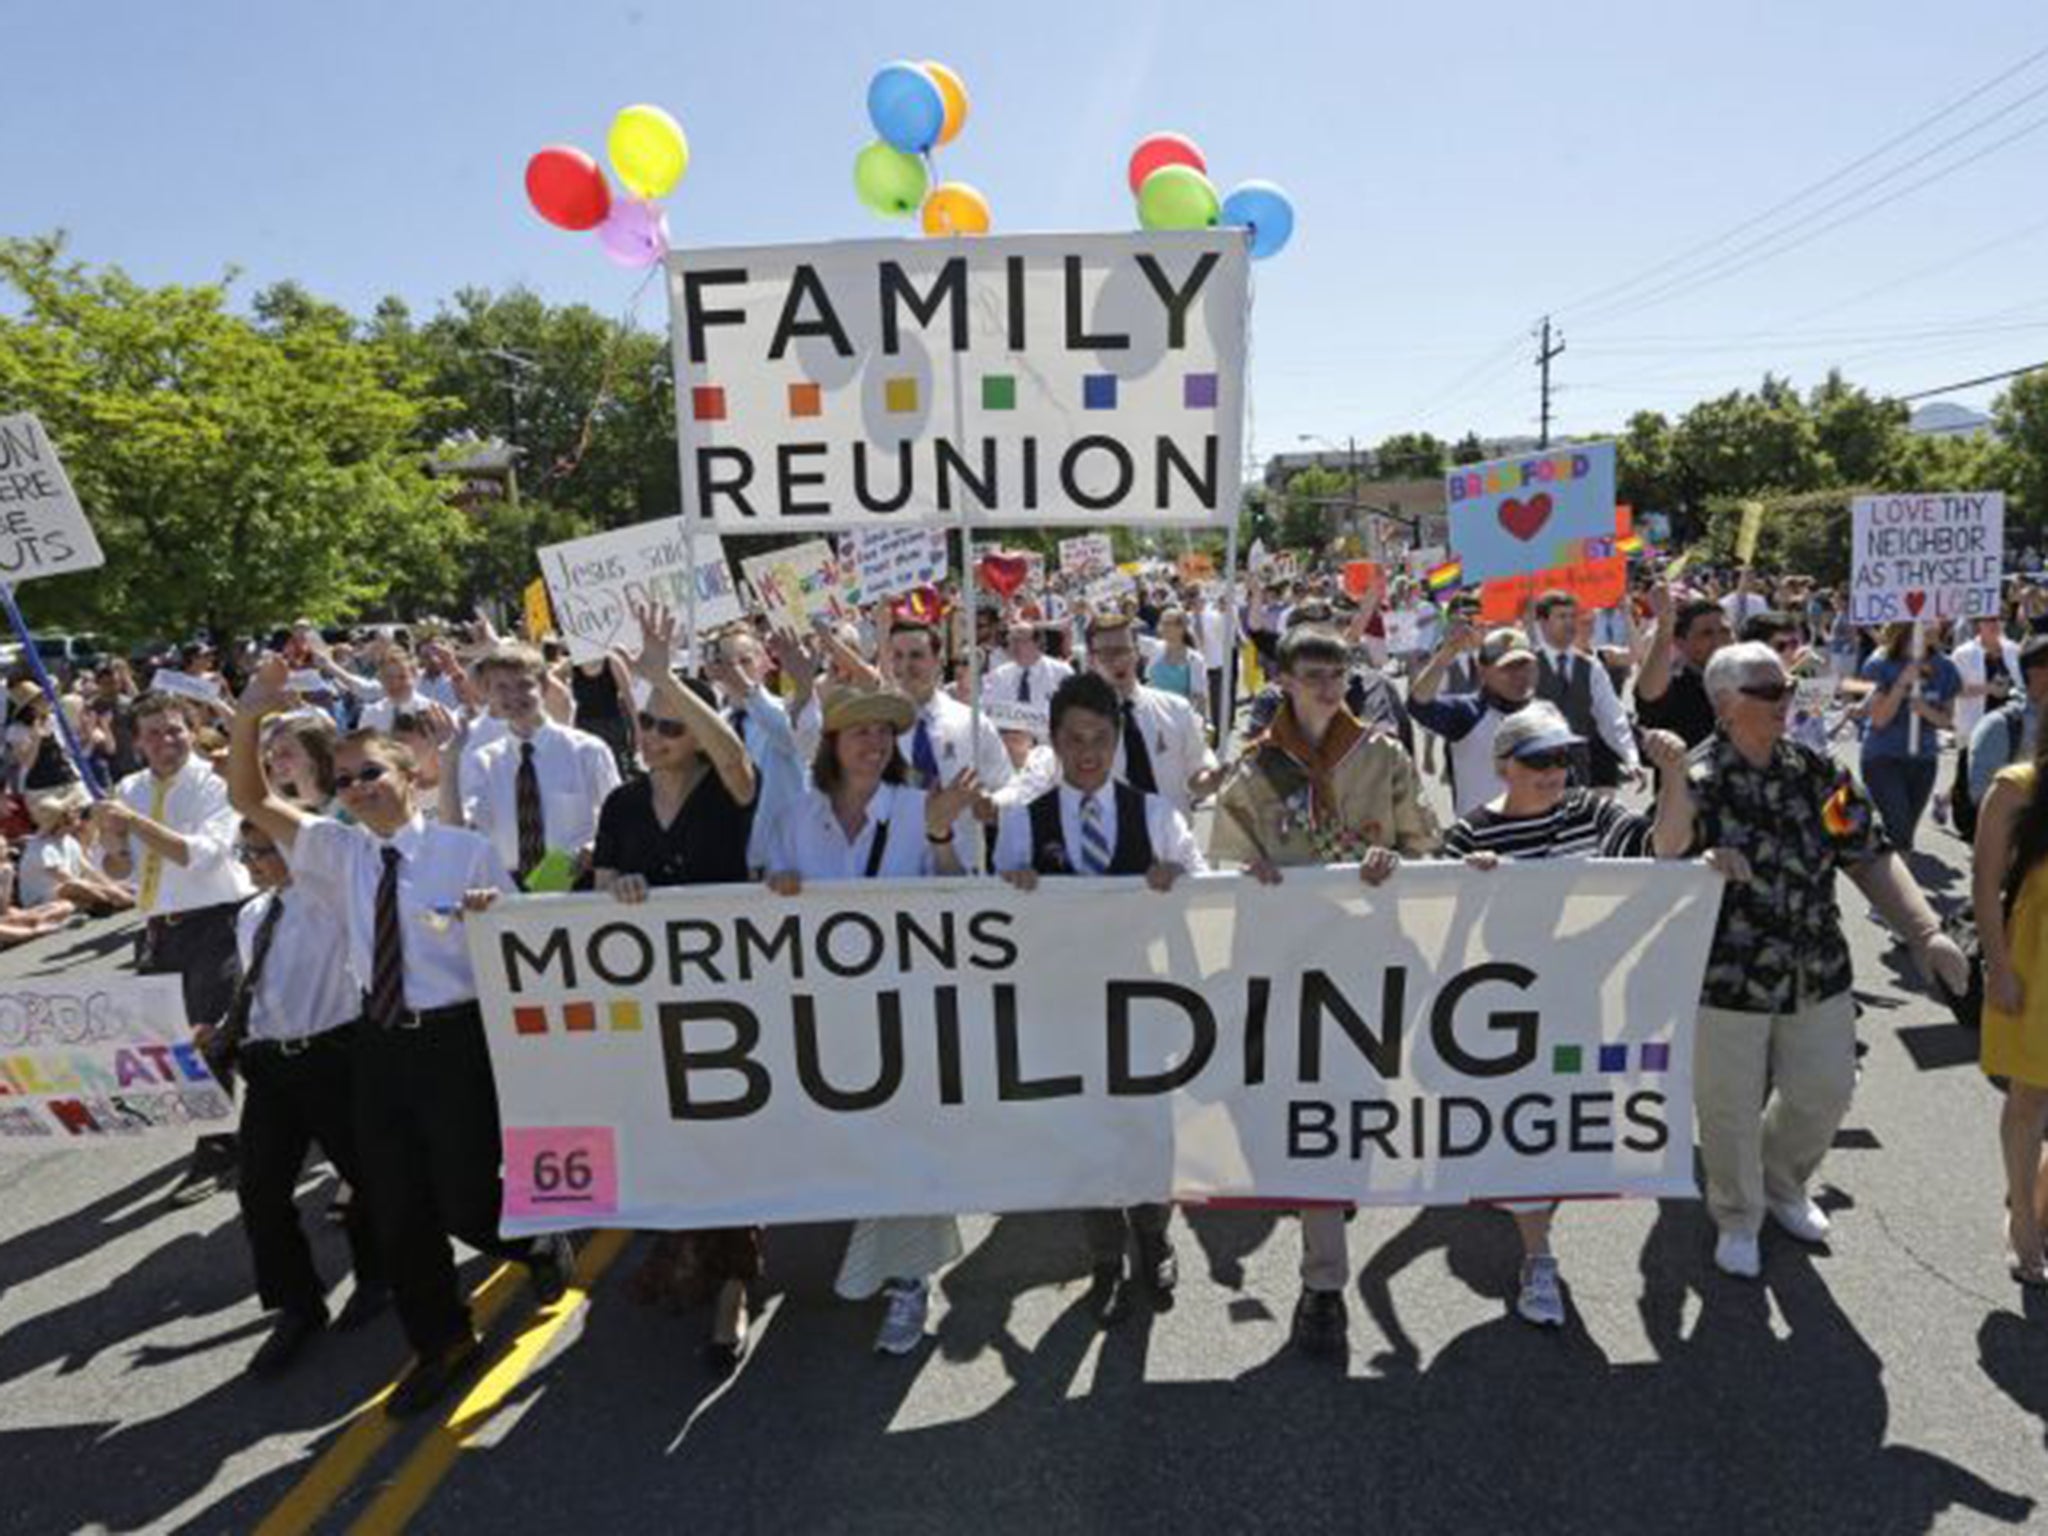 Members of the Mormon church march during the Utah Gay Pride Parade in Salt Lake City in 2013. LGBTQ Mormons and their supporters are reeling over a new rule change by church officials